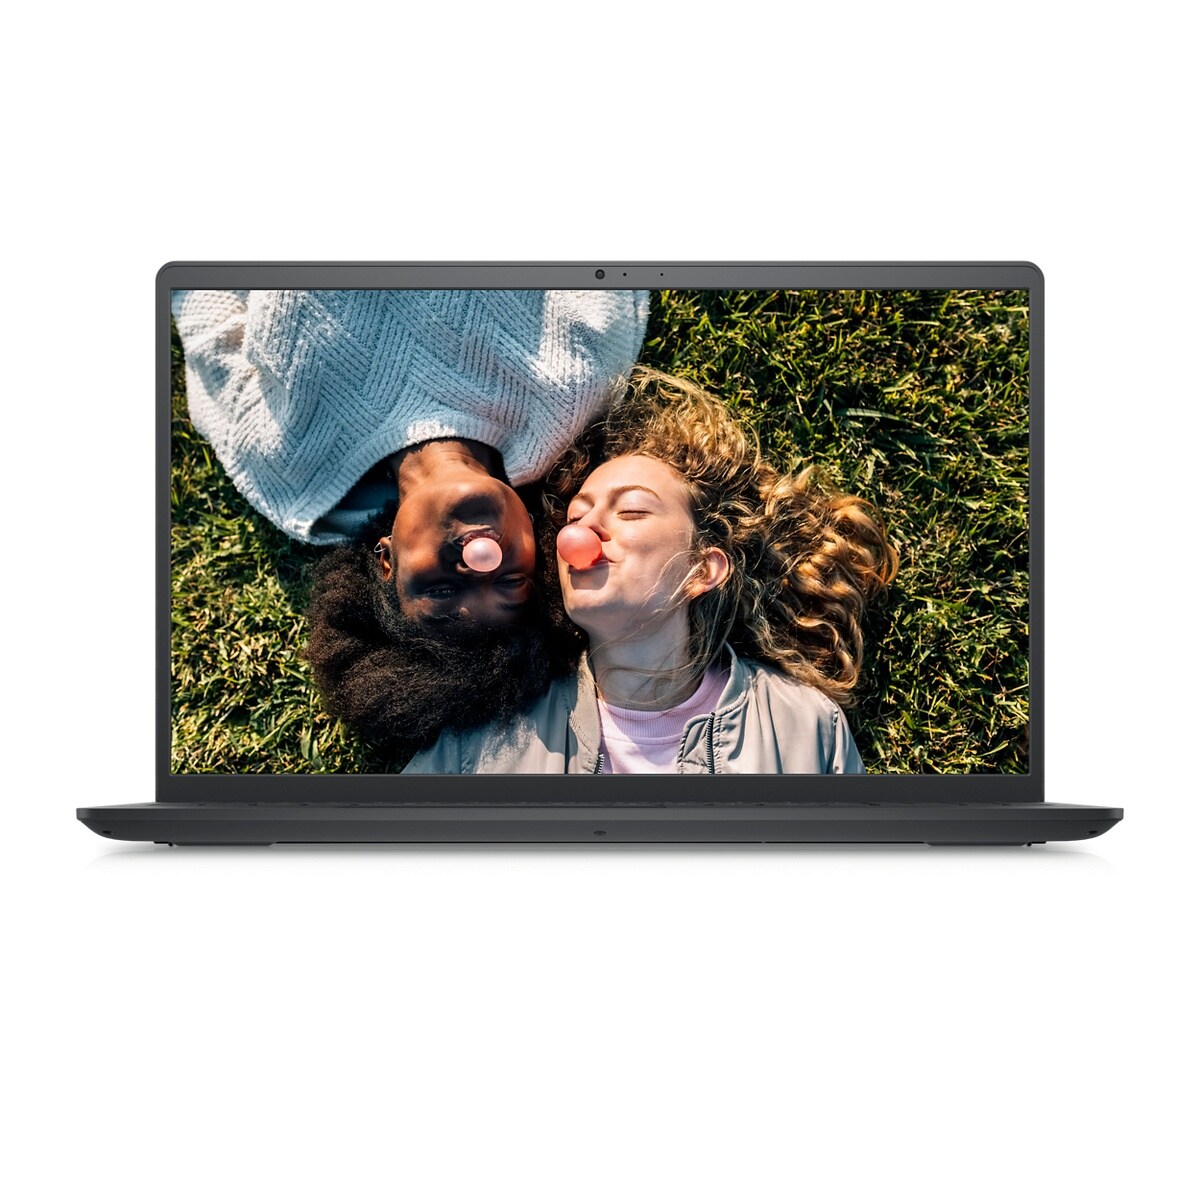 Inspiron 15 3000 Laptop (11th Generation Intel® Core™ i3-1115G4 Processor 8GB, 8GBx1, DDR4, 2666MHz 128GB M.2 PCIe NVMe Solid State Drive) $379